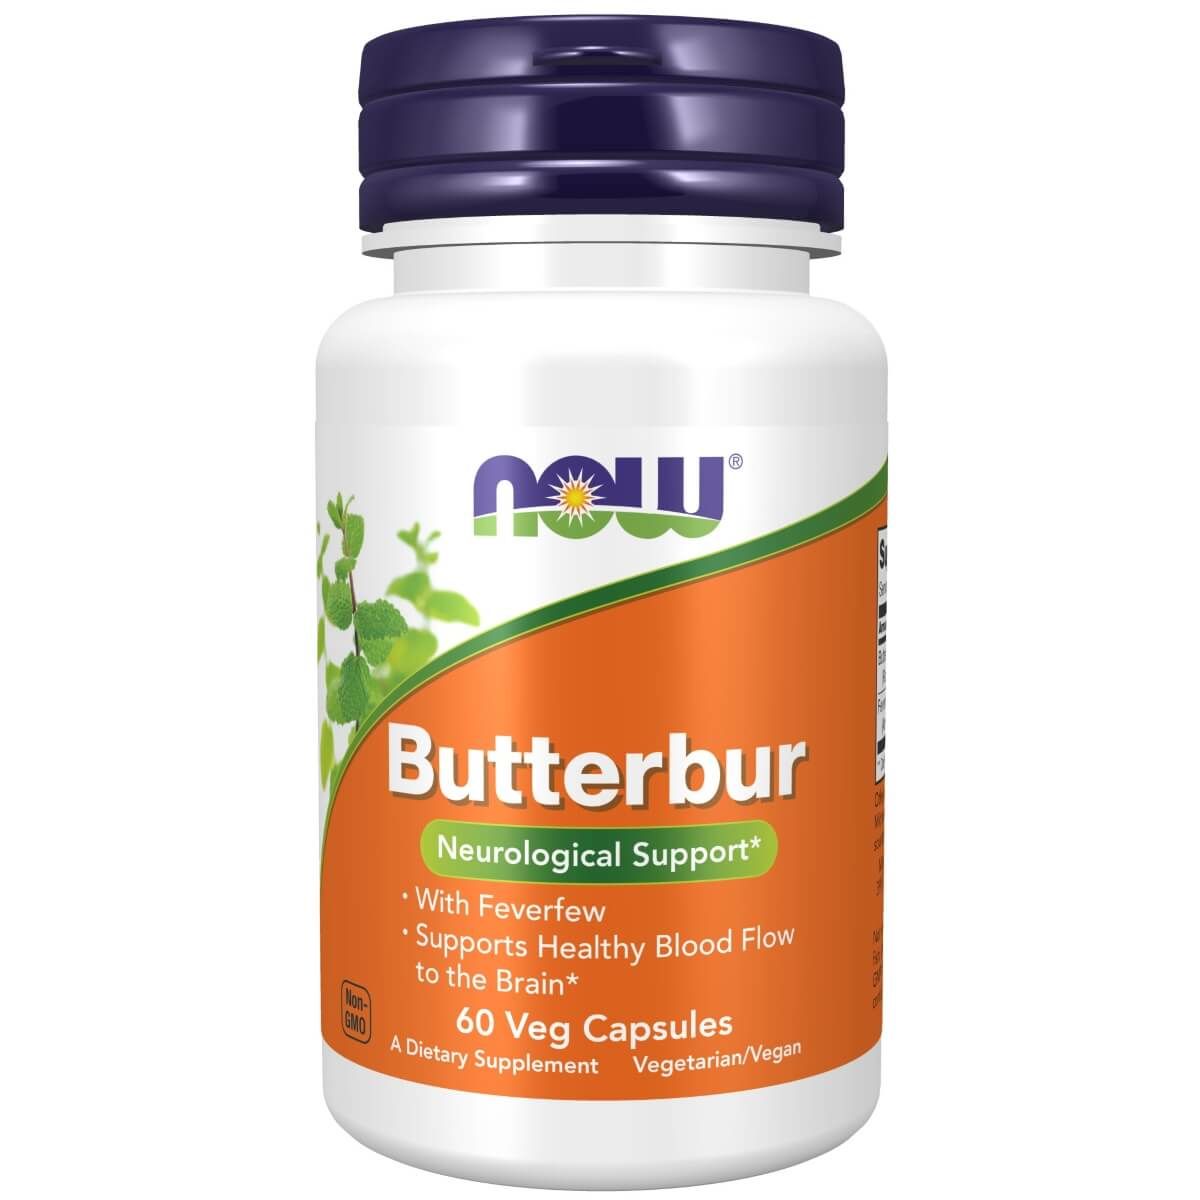 Photos - Vitamins & Minerals Now Foods Butterbur with Feverfew 60 Veg Capsules PBW-P31007 